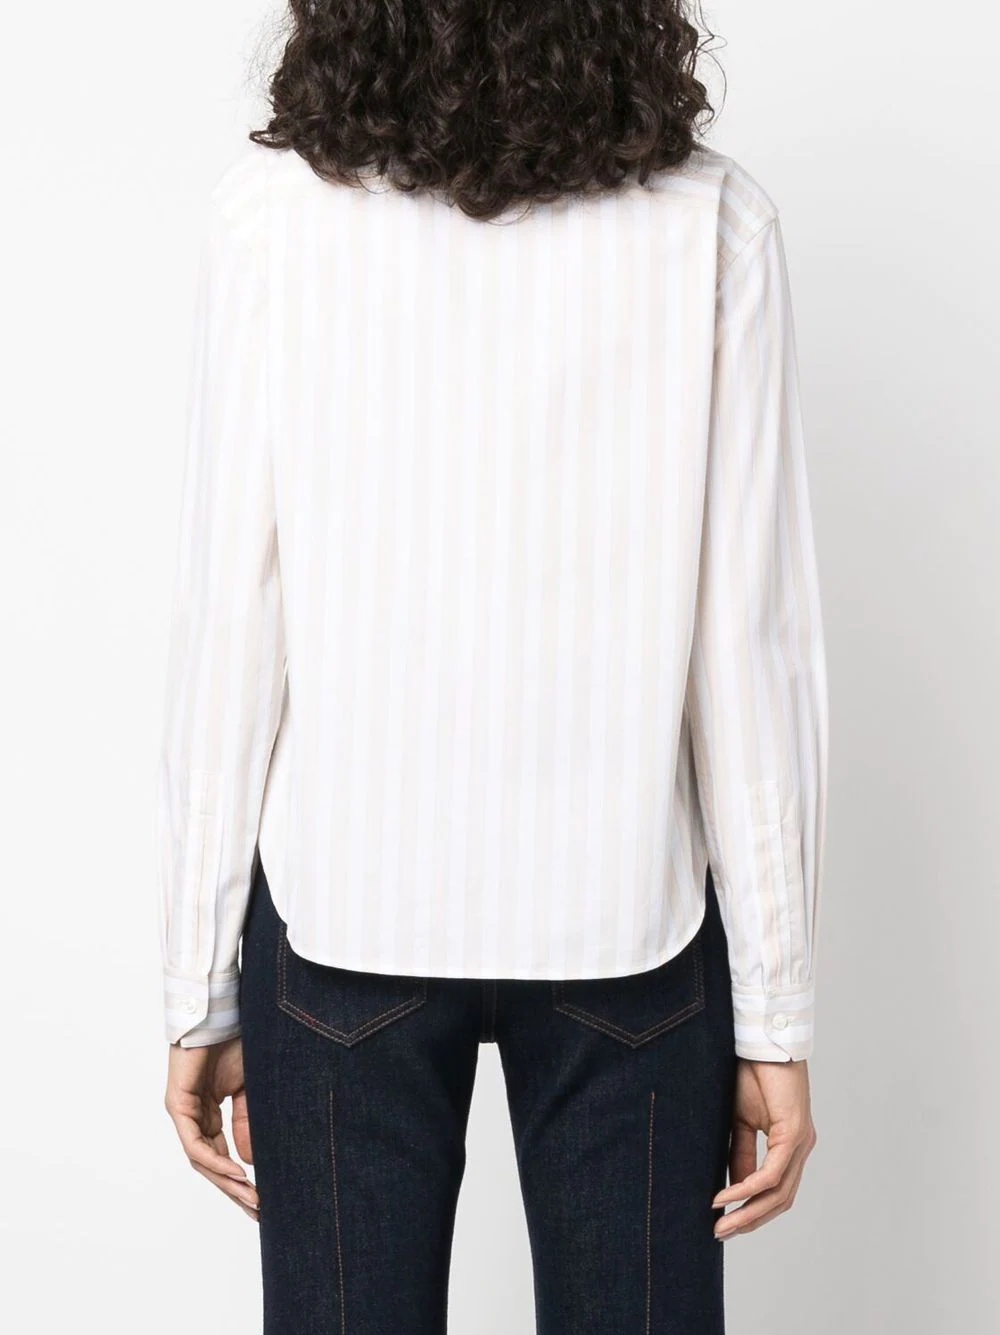 embroidered-logo striped shirt - 4